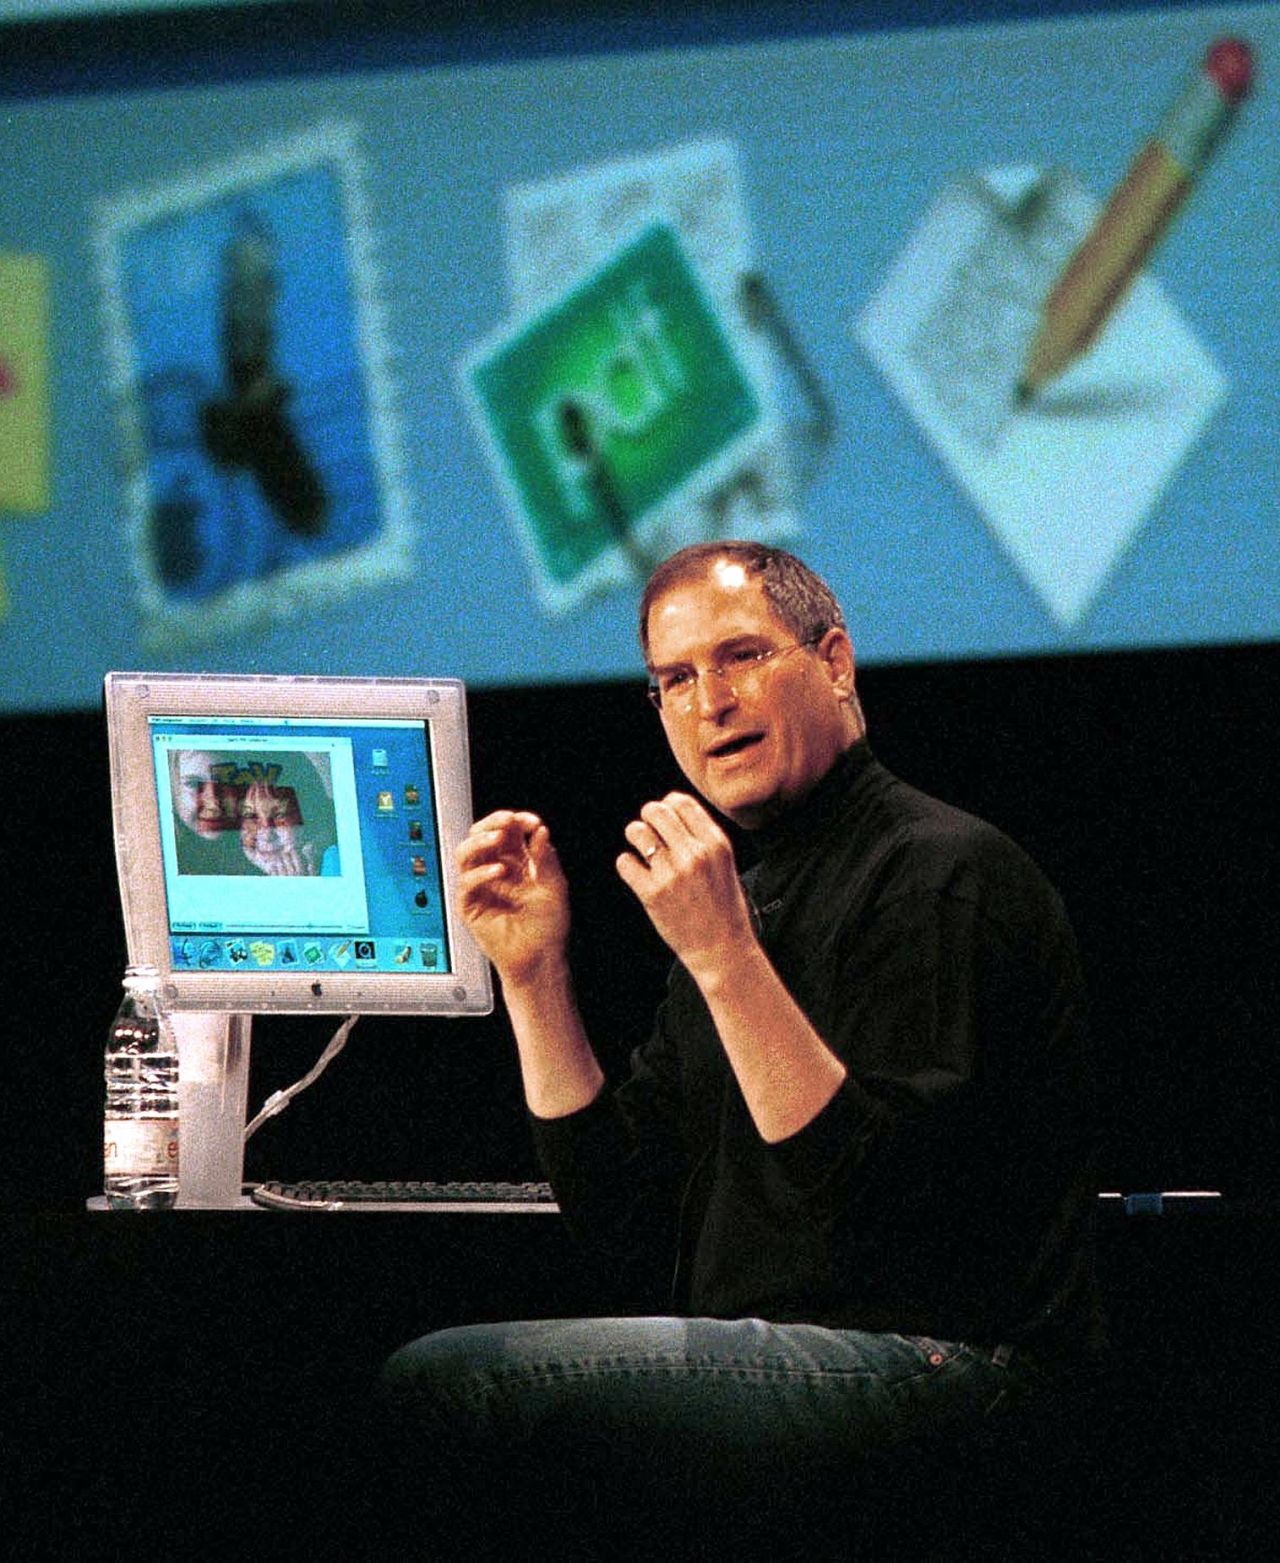 Apple CEO Steve Jobs demonstrated a preview of Apple's forthcoming Mac OS X operating system during his WWDC keynote address in May 2000.